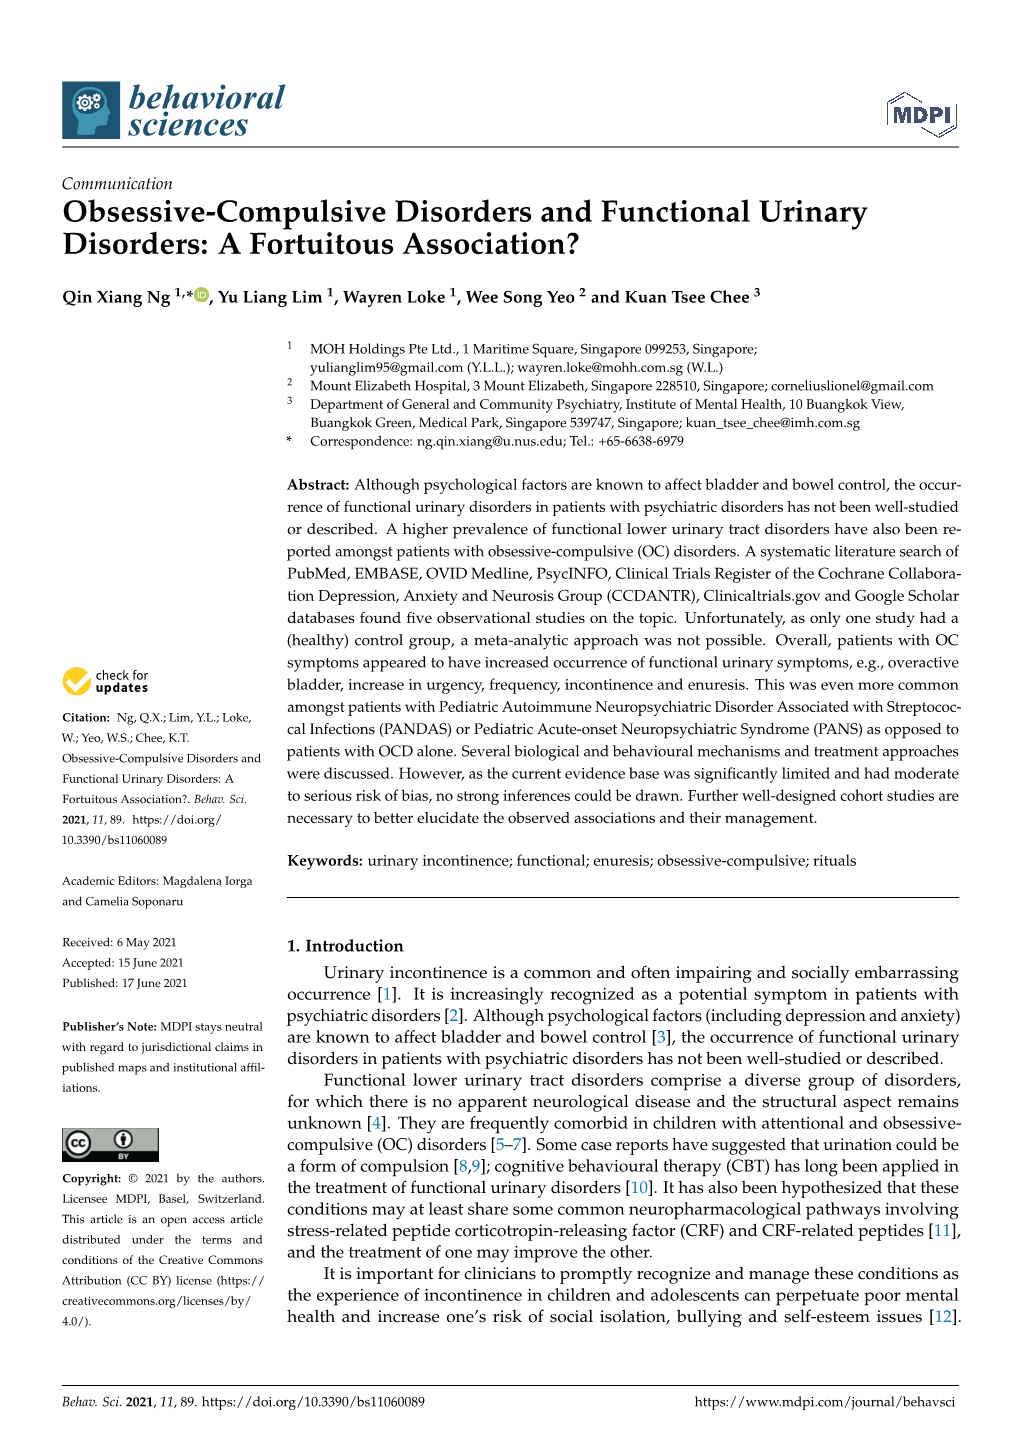 Obsessive-Compulsive Disorders and Functional Urinary Disorders: a Fortuitous Association?